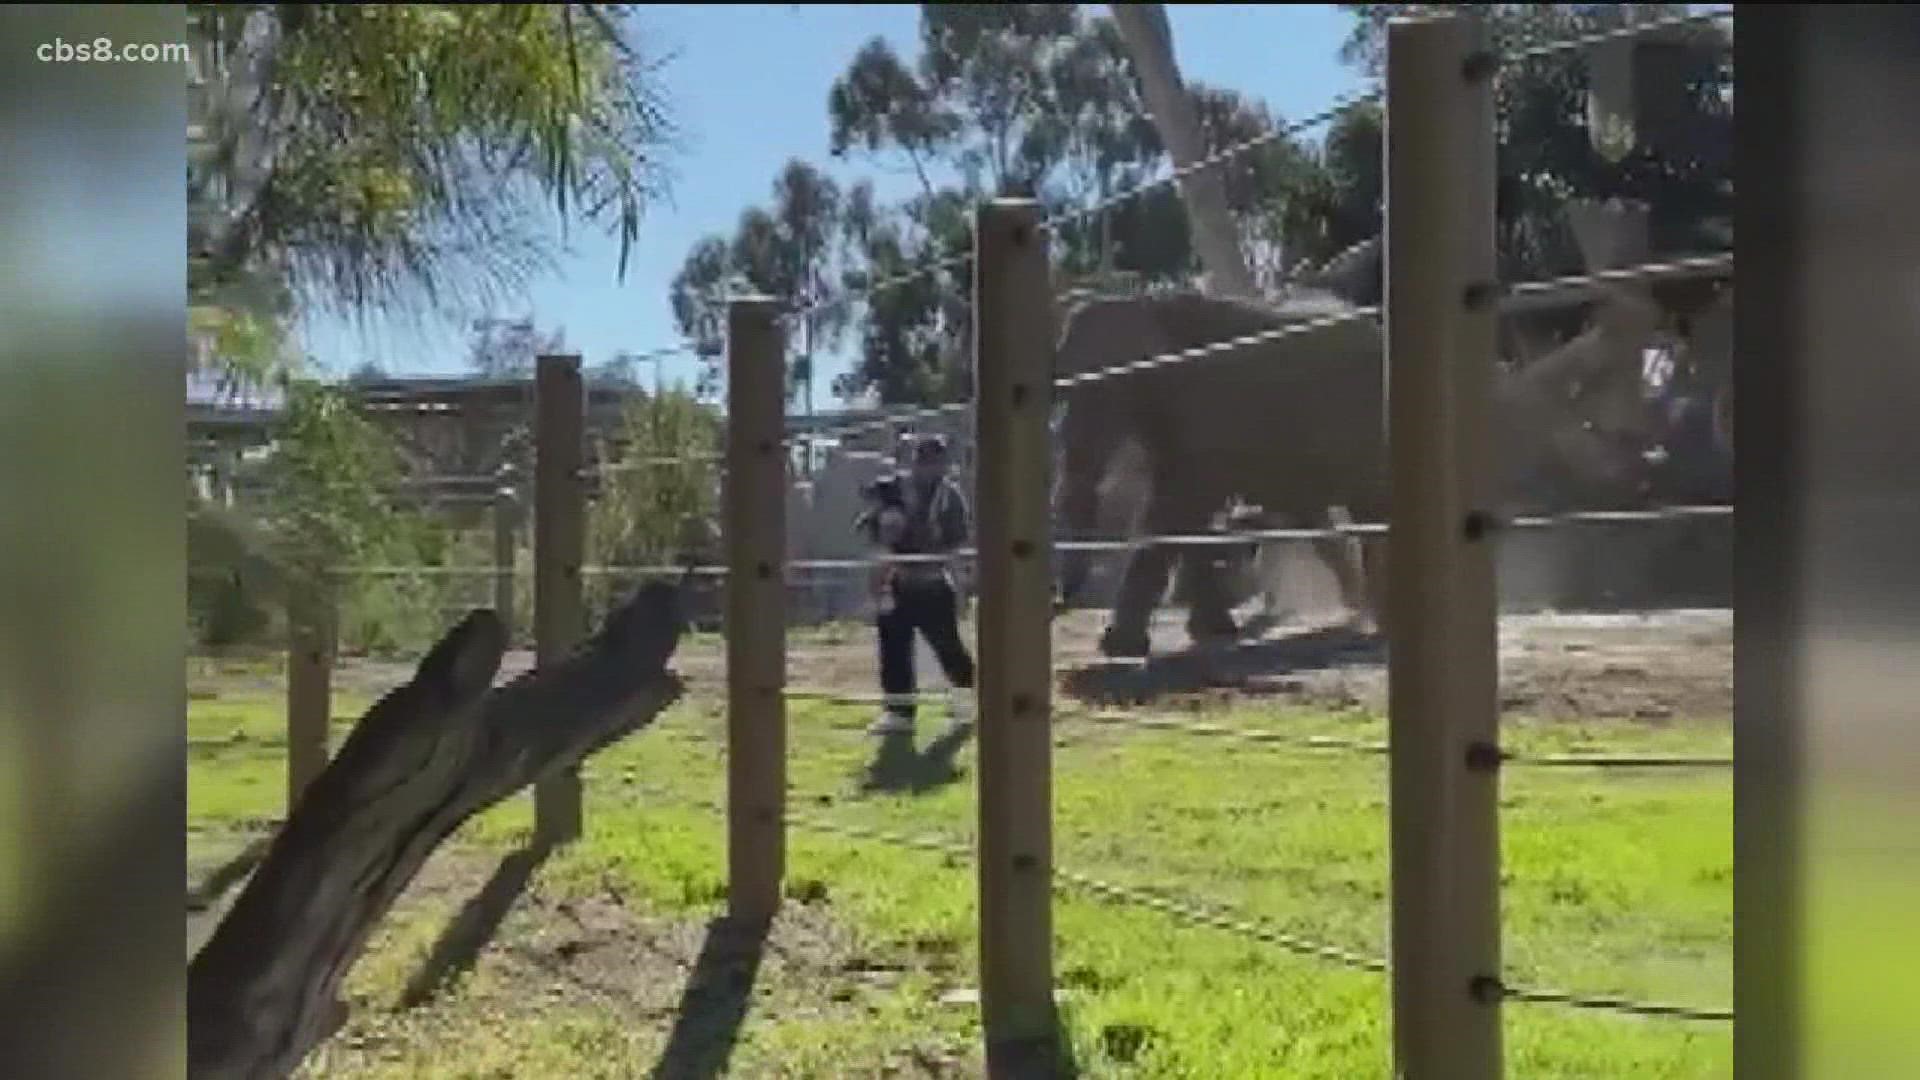 A man accused of carrying his daughter into an elephant enclosure has been ordered to stay away from the San Diego Zoo after child abuse and trespassing charges.